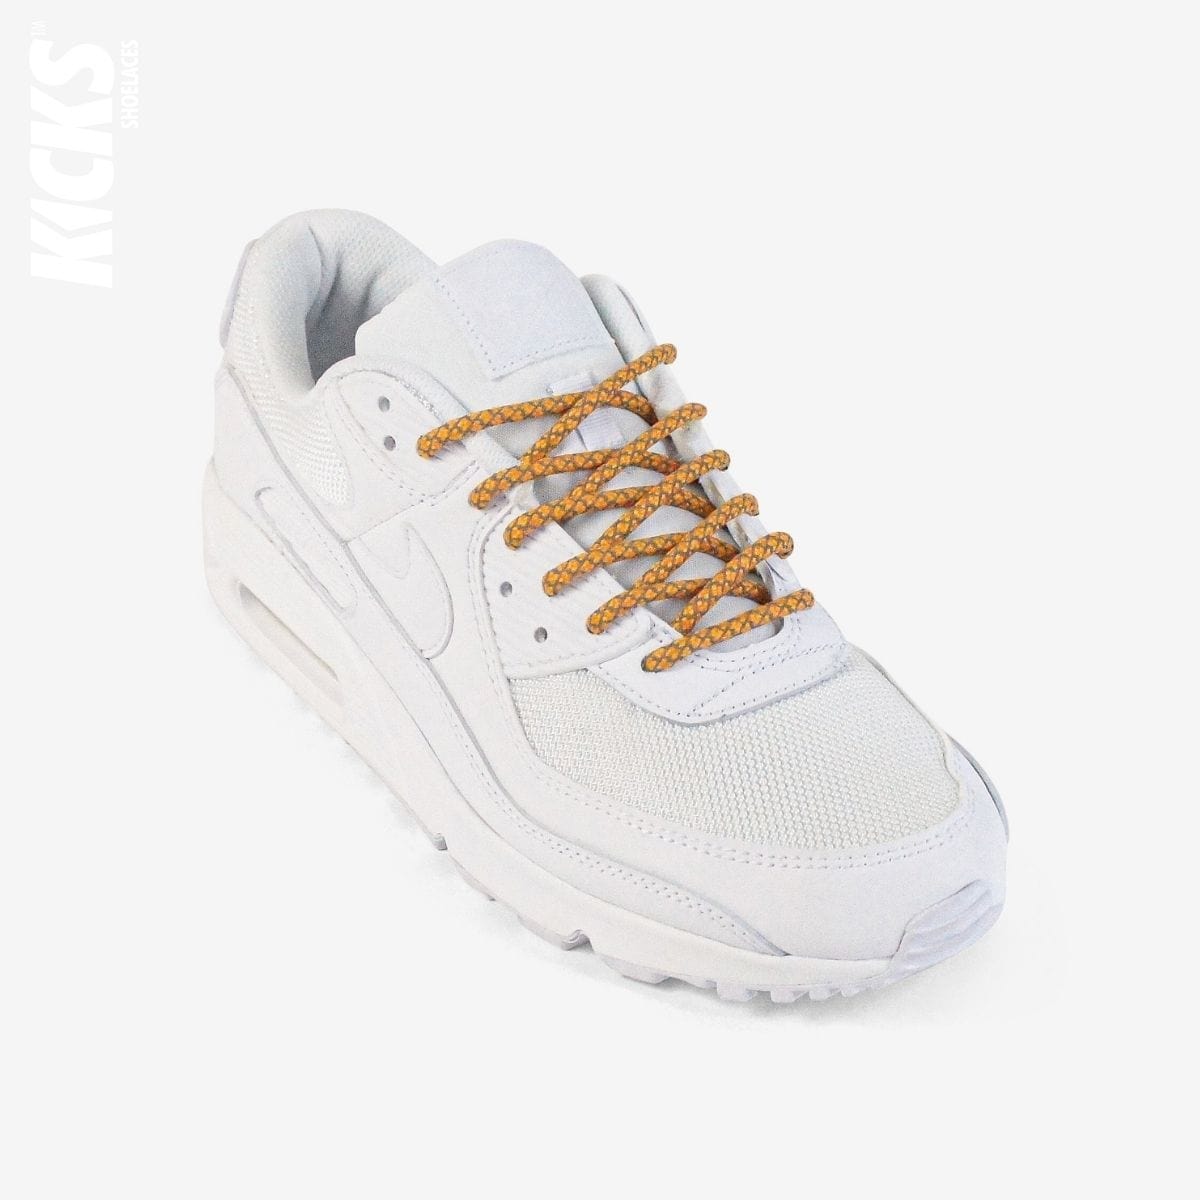 rope-laces-on-white-sneakers-with-kids-golden-orange-shoelaces